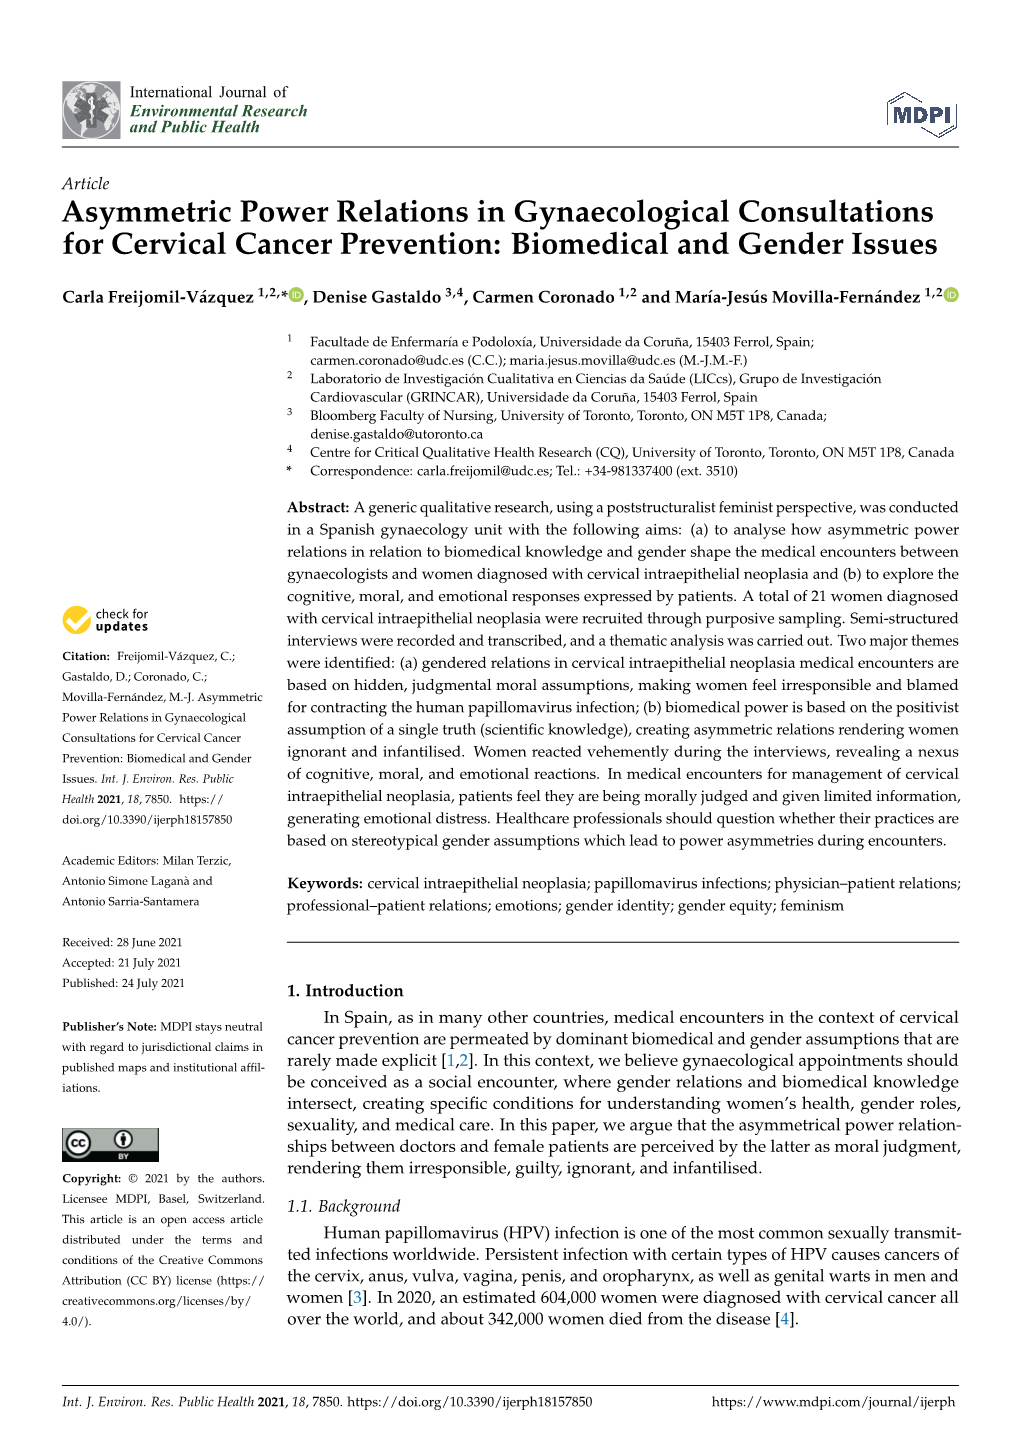 Asymmetric Power Relations in Gynaecological Consultations for Cervical Cancer Prevention: Biomedical and Gender Issues